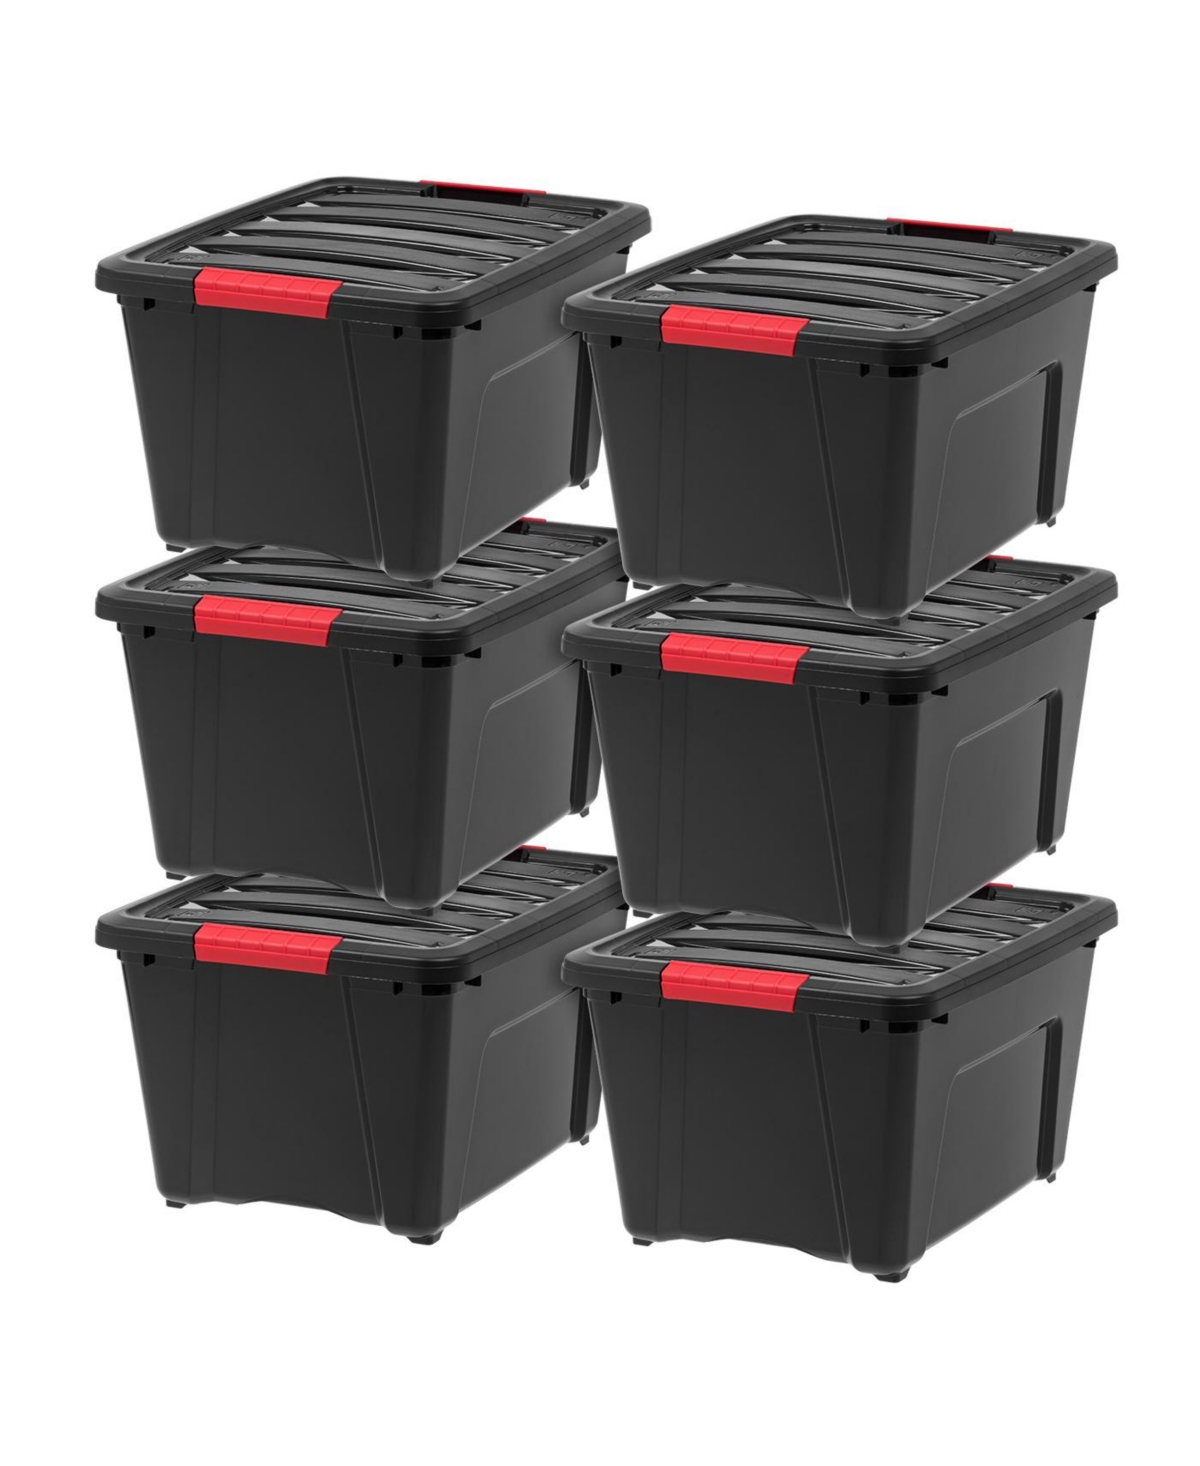 32 Quart Stackable Plastic Storage Bins with Lids and Latching Buckles, 6 Pack - Black, Containers with Lids and Latches - Black